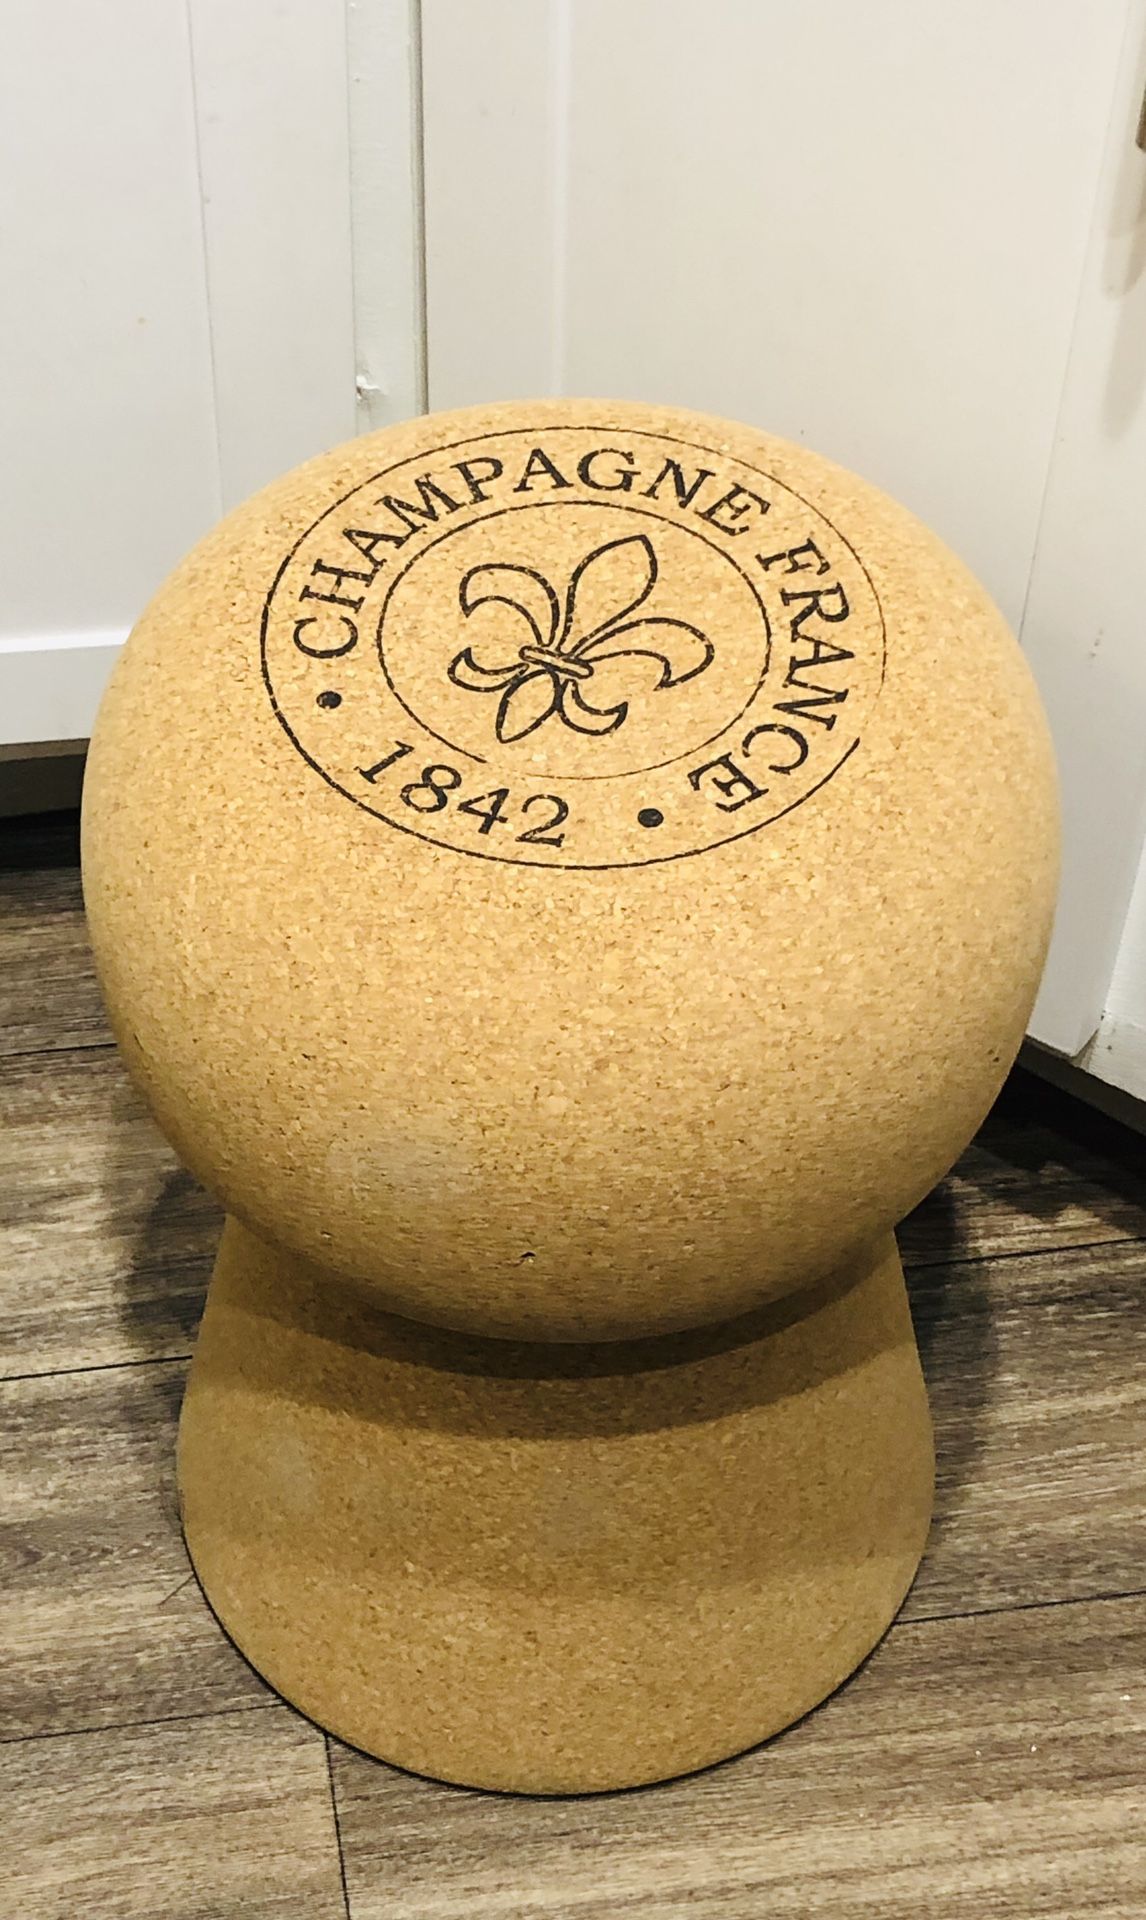 Giant Champagne Cork Table/Stool for Sale in Naperville, IL - OfferUp